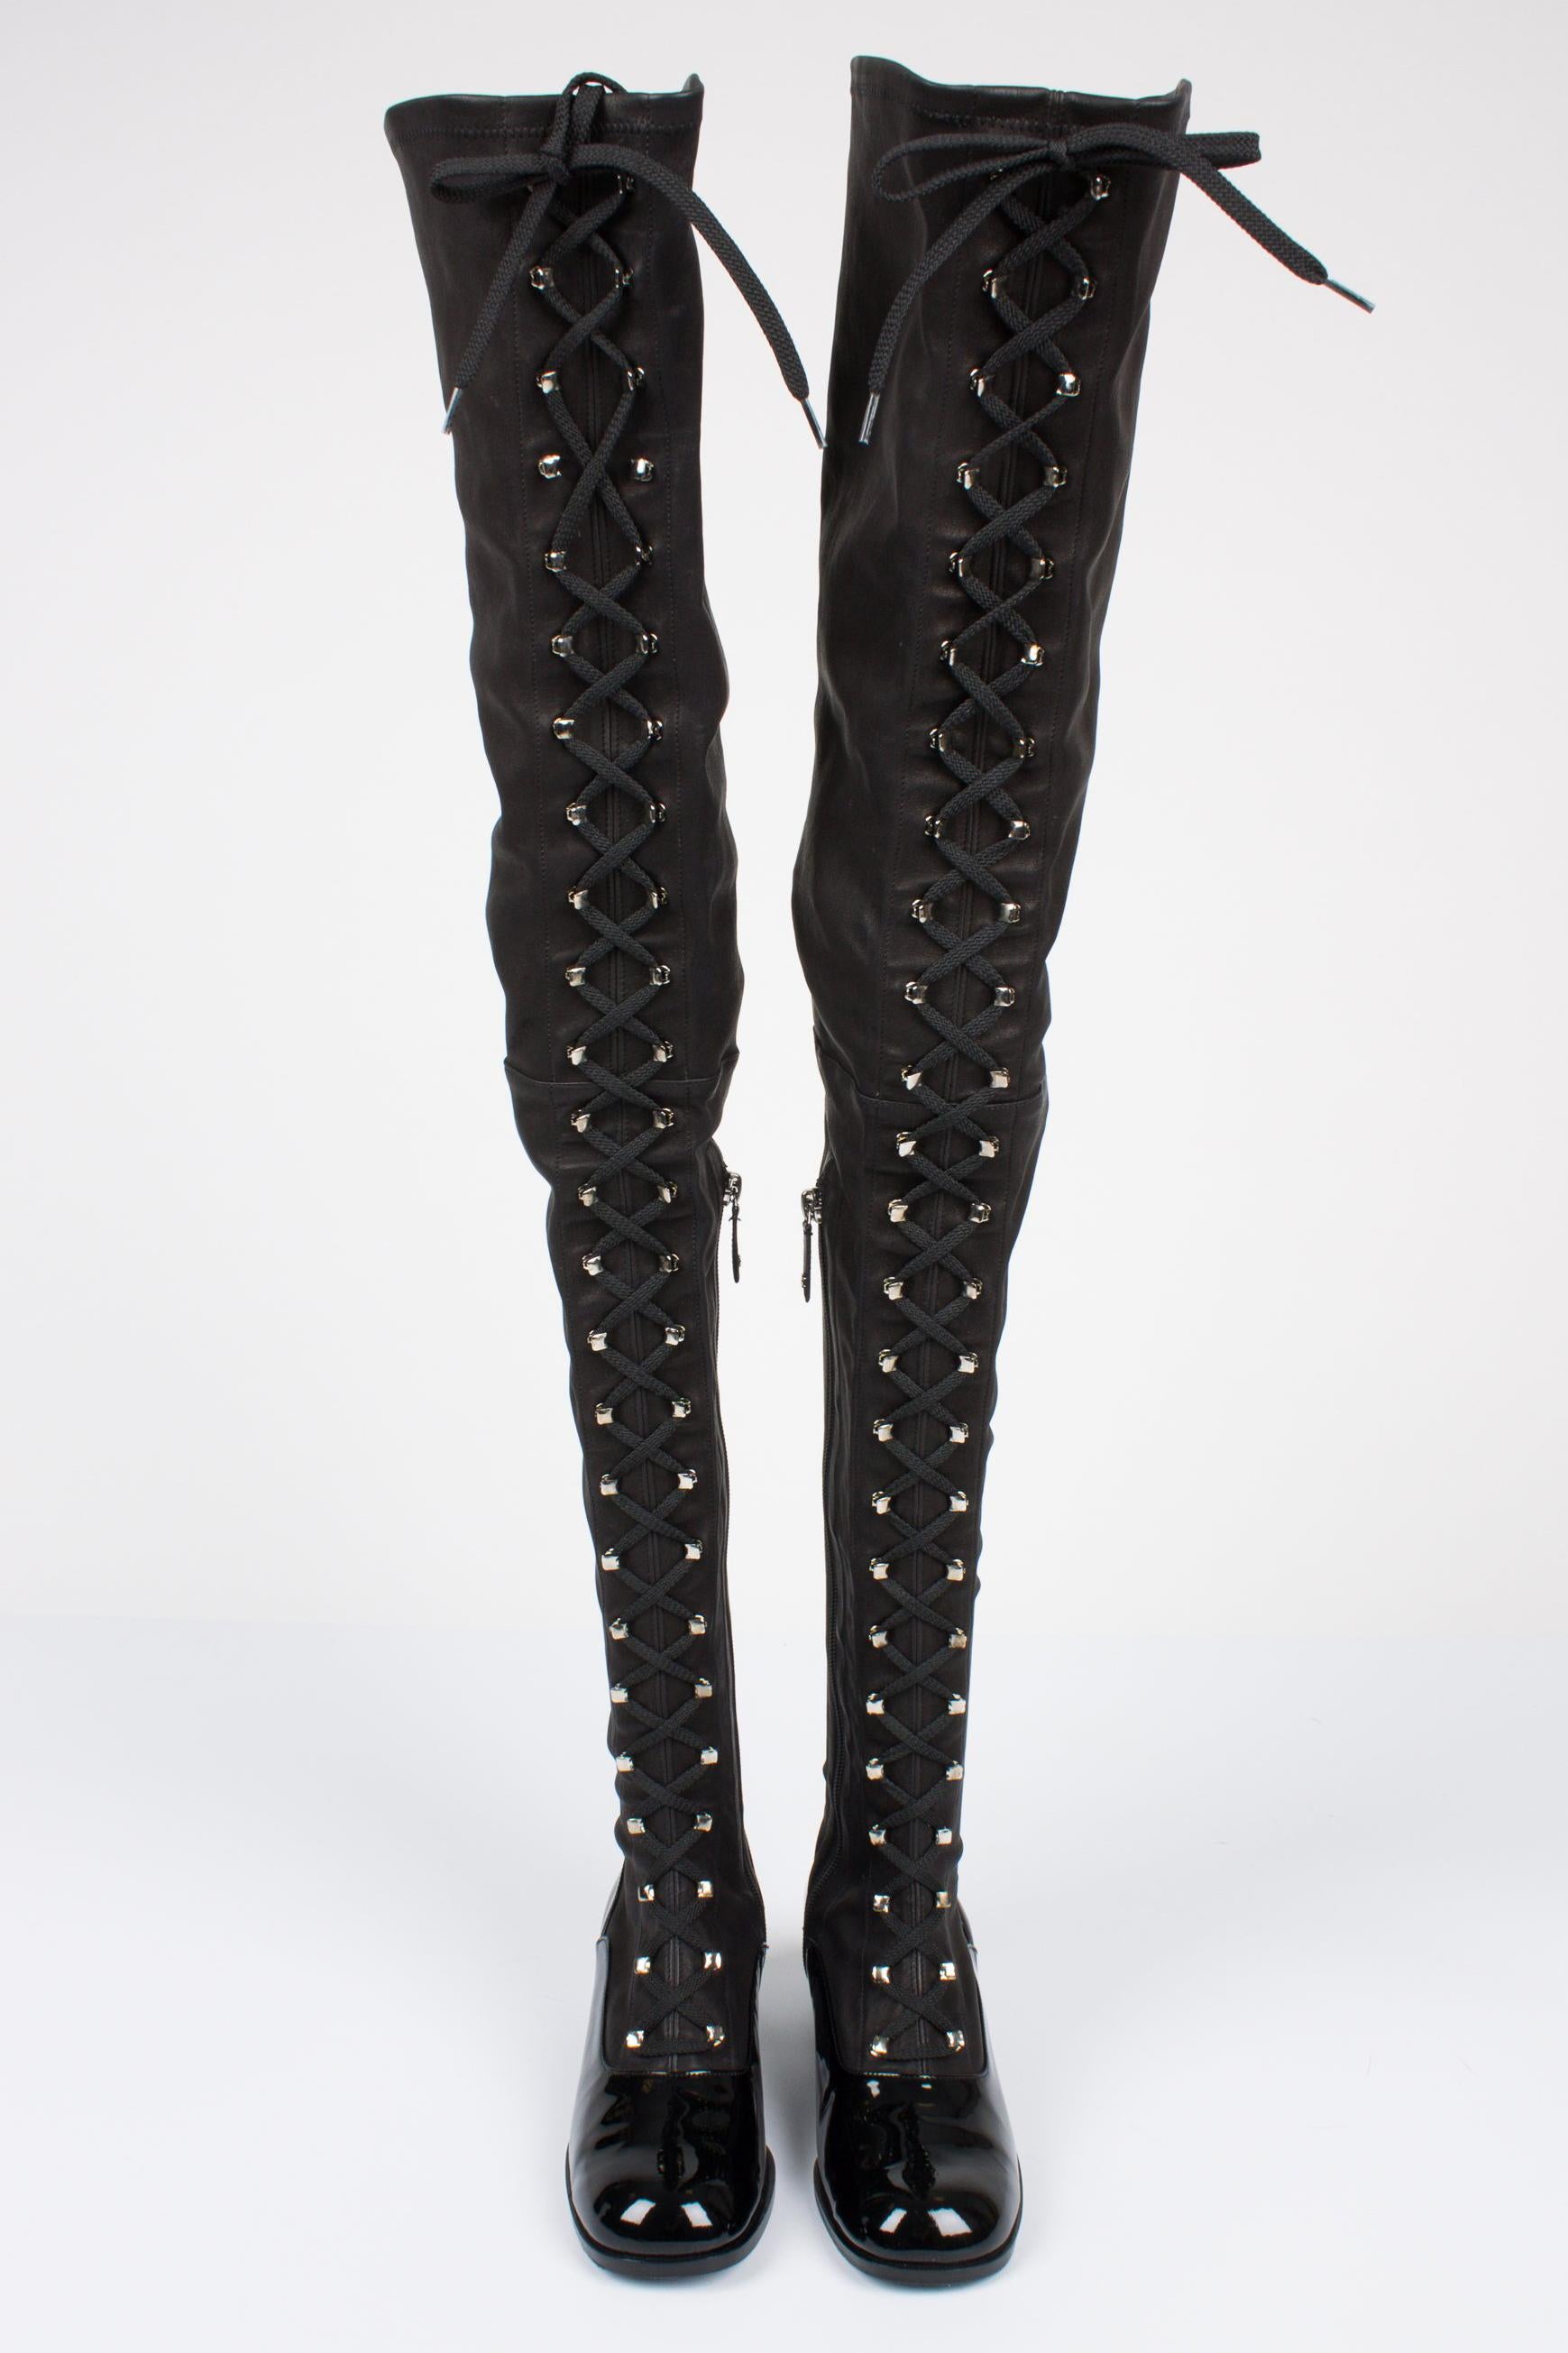 Ultra long lace-up boots by Chanel, true beauties!

This pair is made of stretching leather and patent leather and has an endless row of silver hooks at the front, threaded with a black lace.  Luckily there is a zipper on the side! A small leather